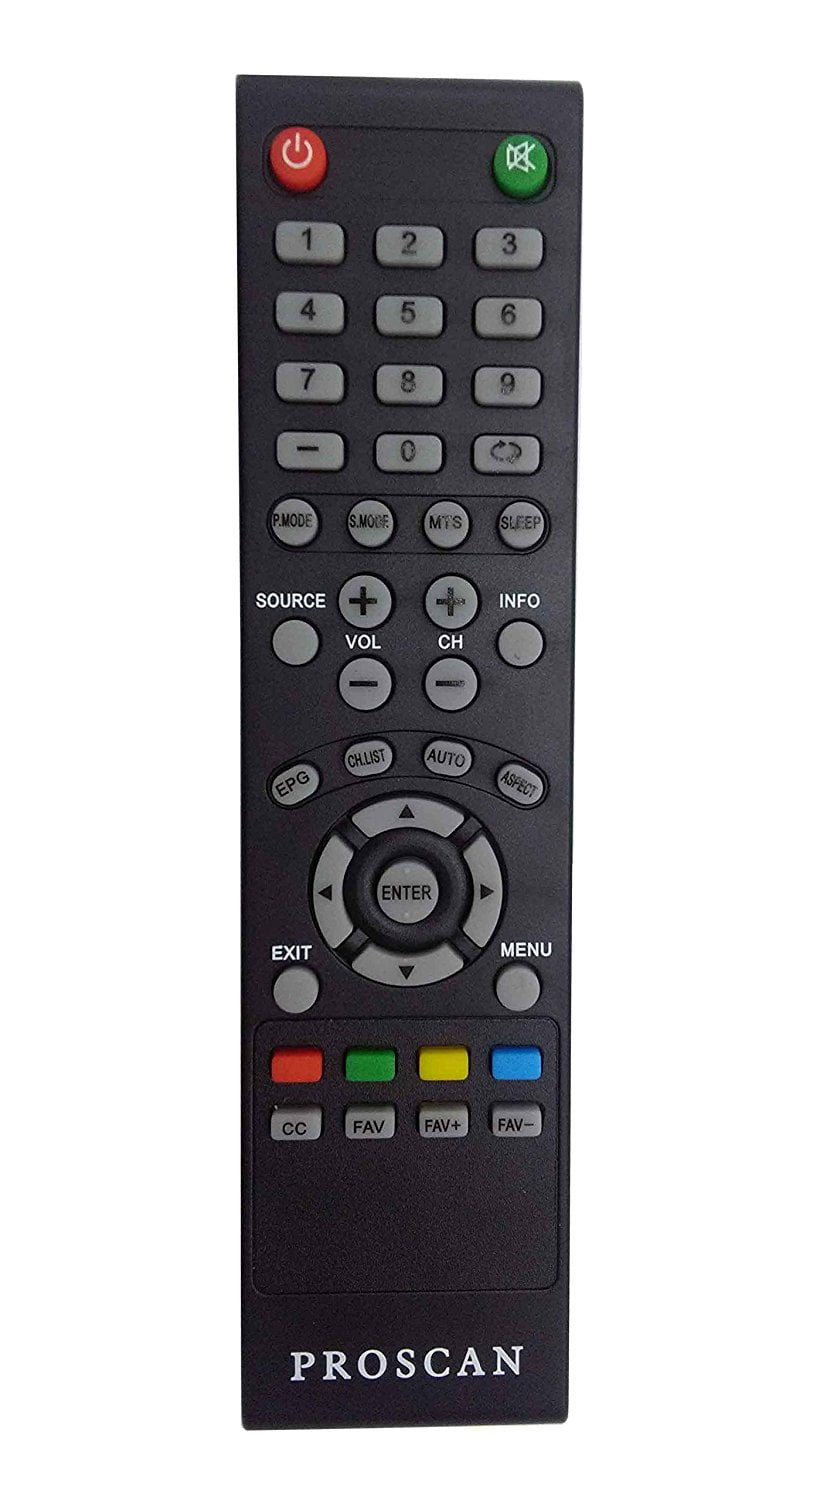 Genuine Proscan PL-1.0 TV Remote Control compatible with Proscan TV